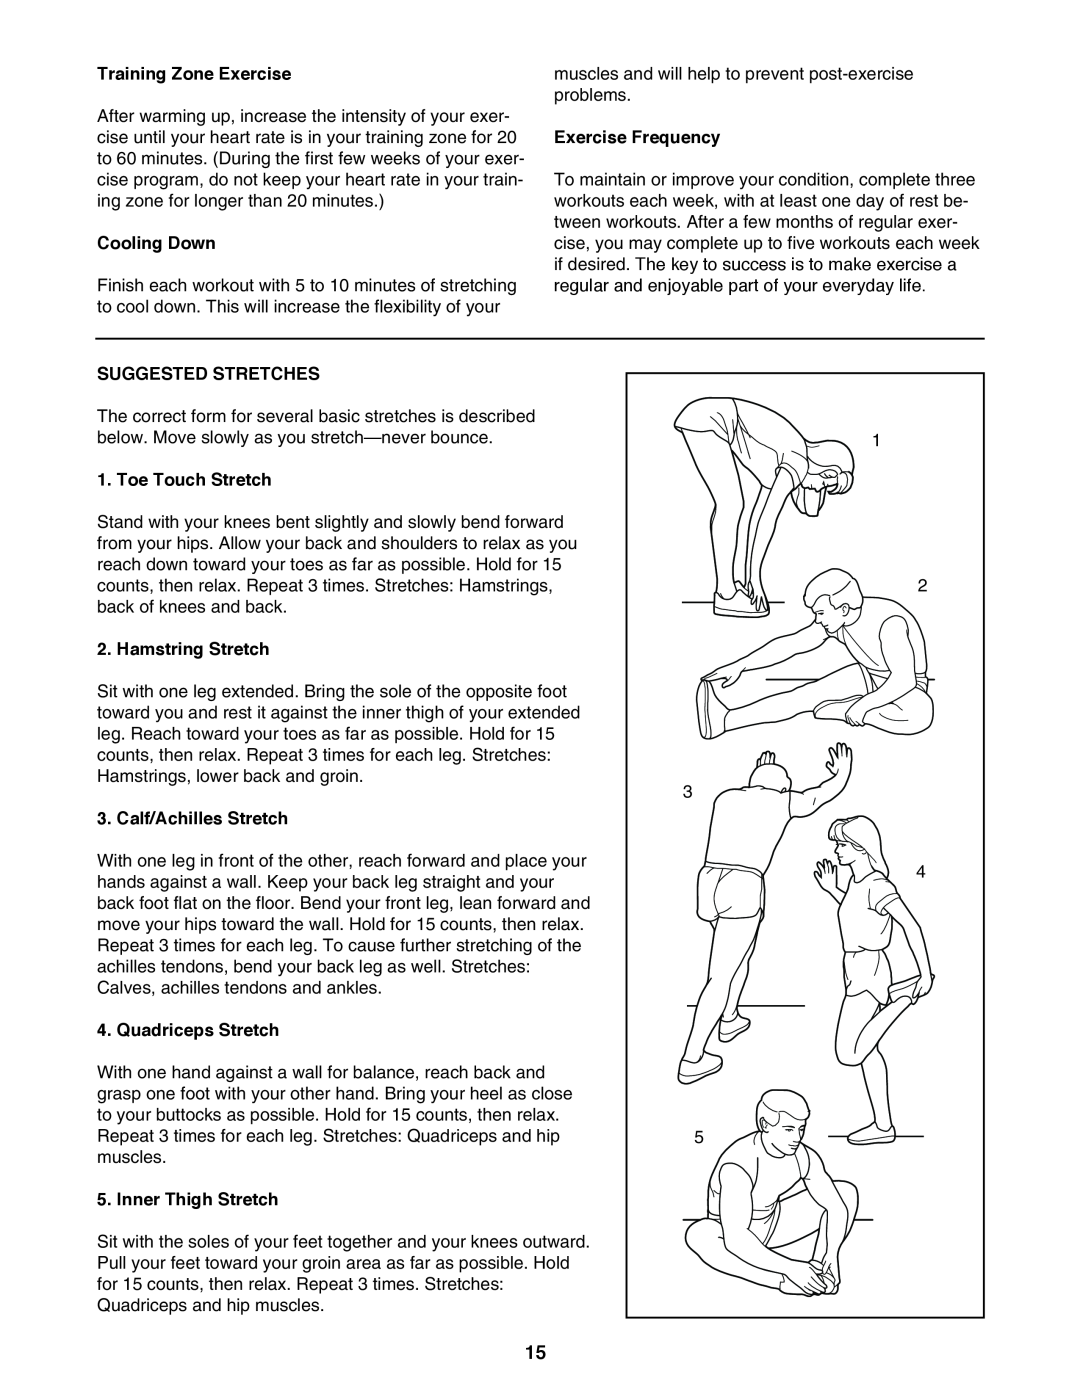 ProForm 831.297390 Training Zone Exercise, Cooling Down, Exercise Frequency, Suggested Stretches, Toe Touch Stretch 